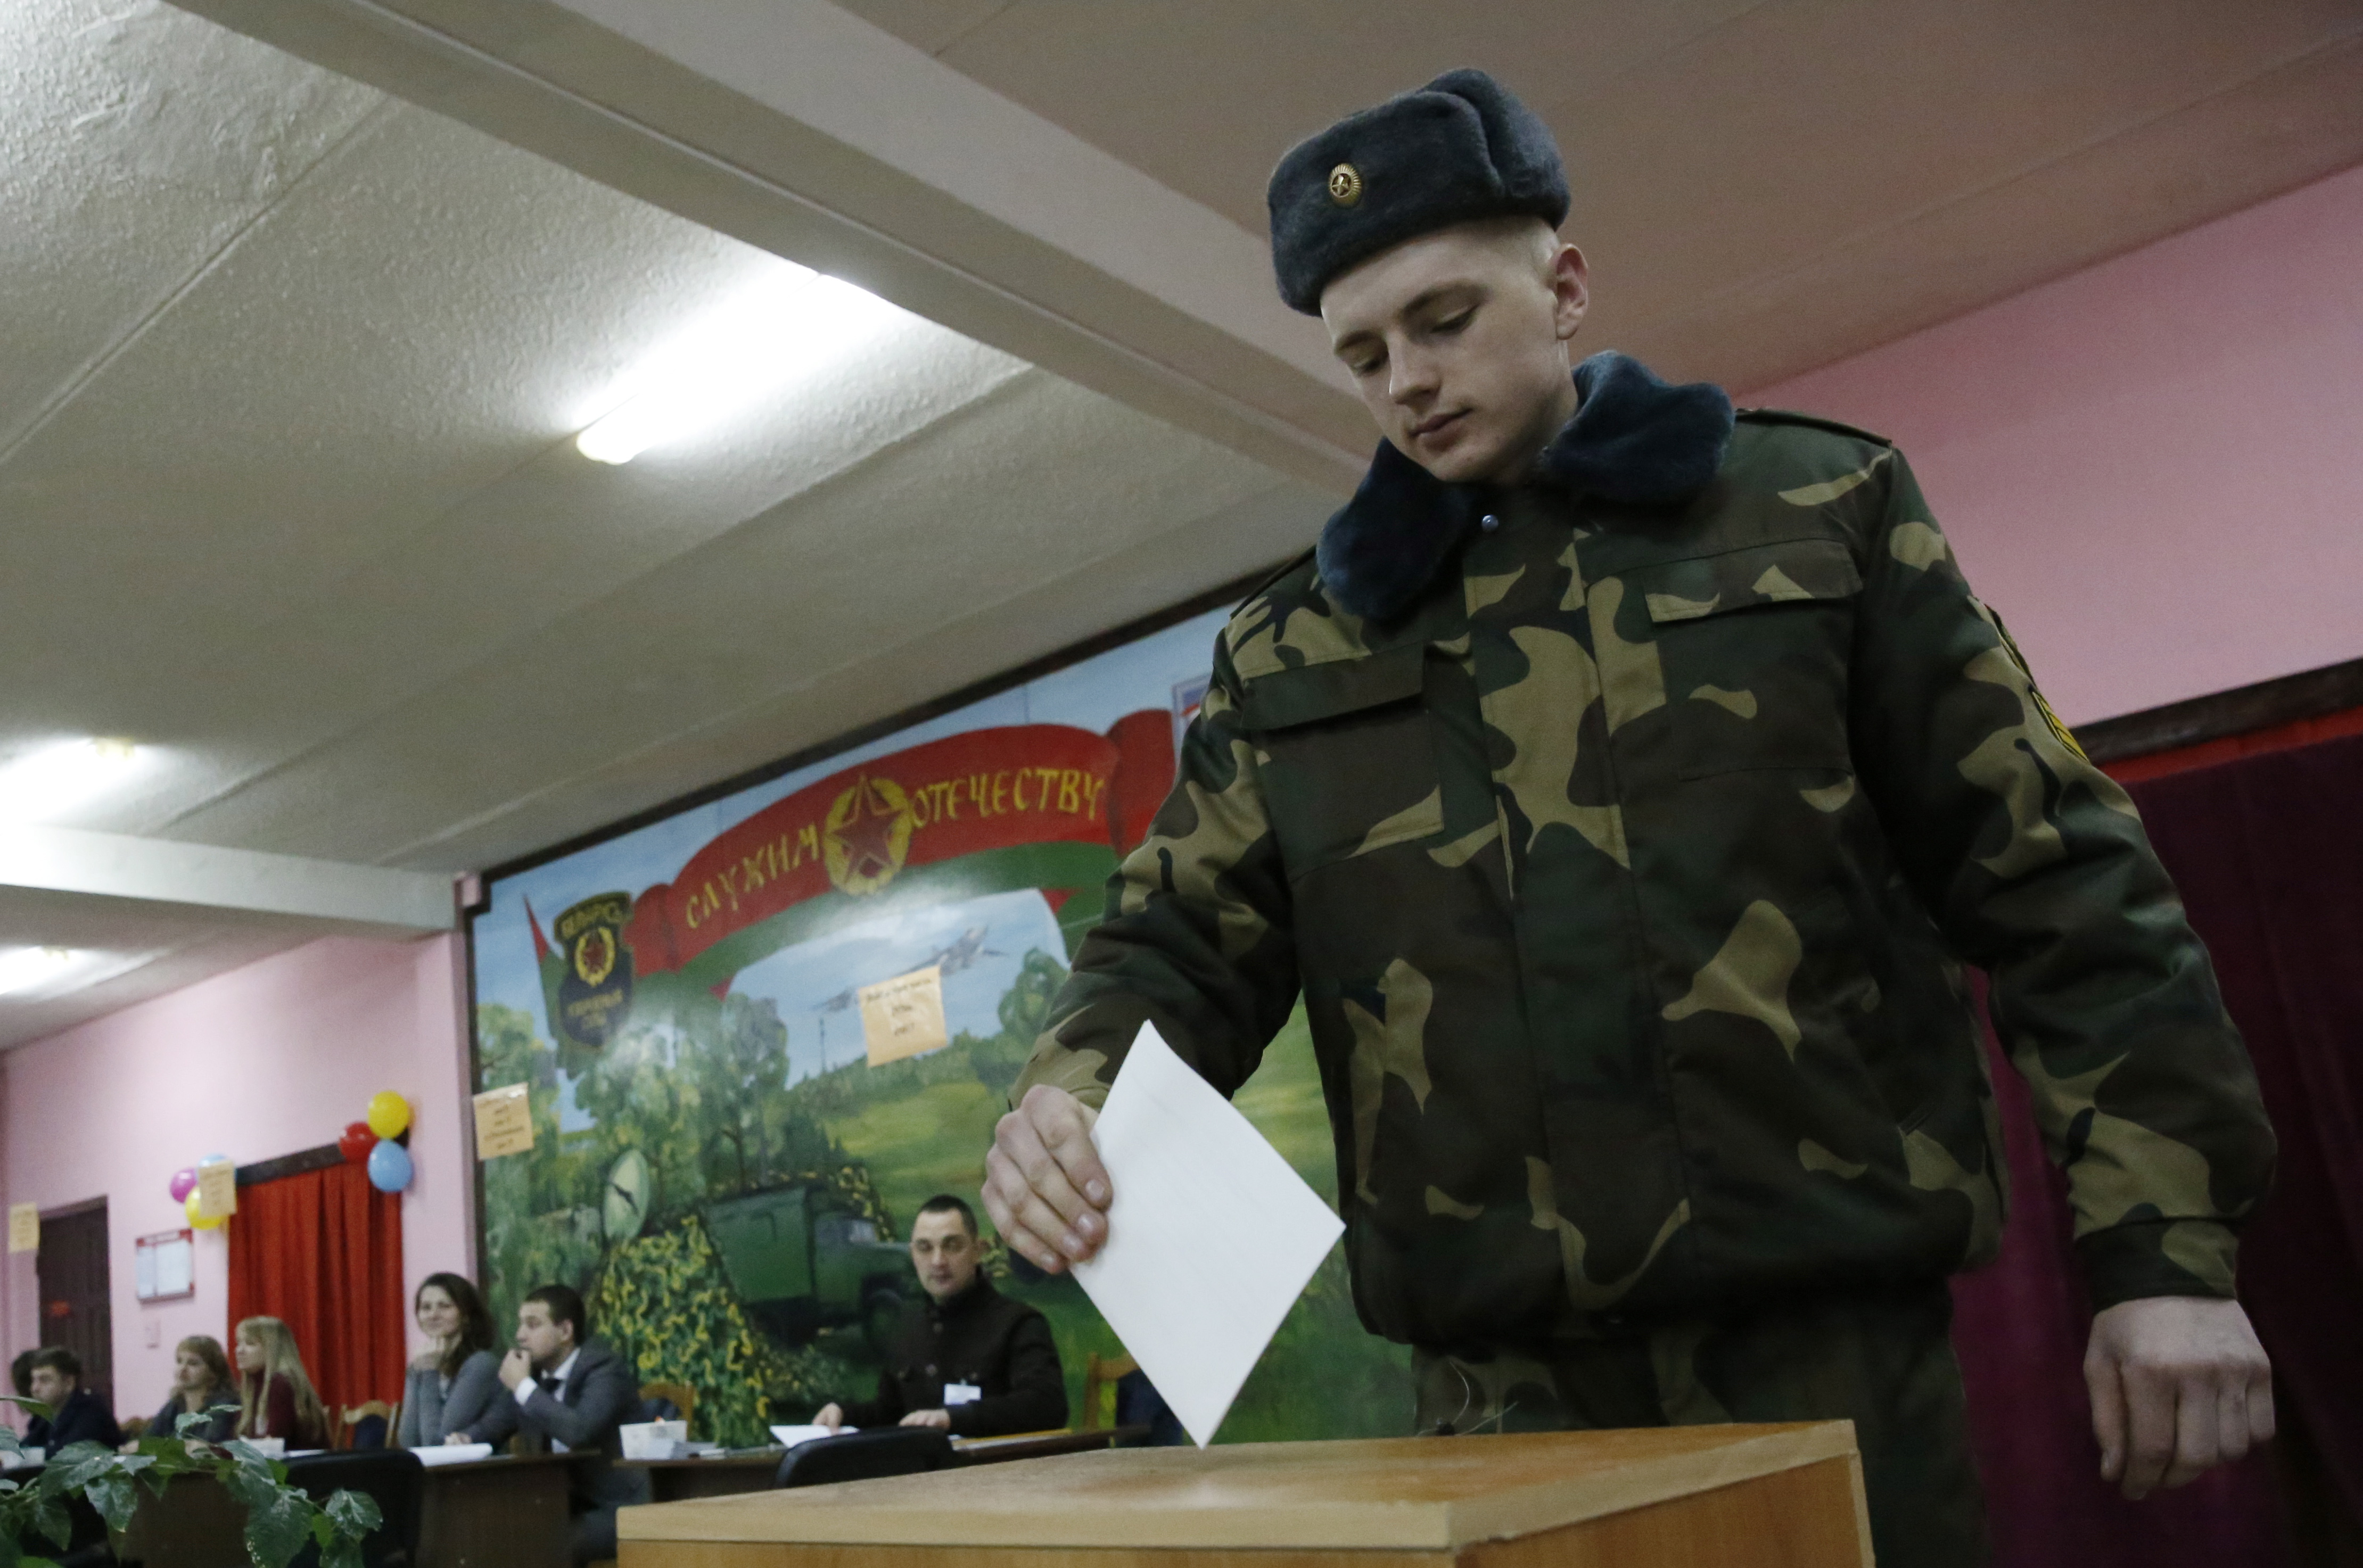 epa08003040 A Belarusian soldier casts his ballot at a polling station during parliamentary elections, in Minsk, Belarus, 17 November 2019. The elections are being closely watched by the West to see how much leeway country's President Alexander Lukashenko, who has been in power for 25 years, is willing to give to opposition candidates. Around 300 opposition candidates are running in the election.  EPA/TATYANA ZENKOVICH